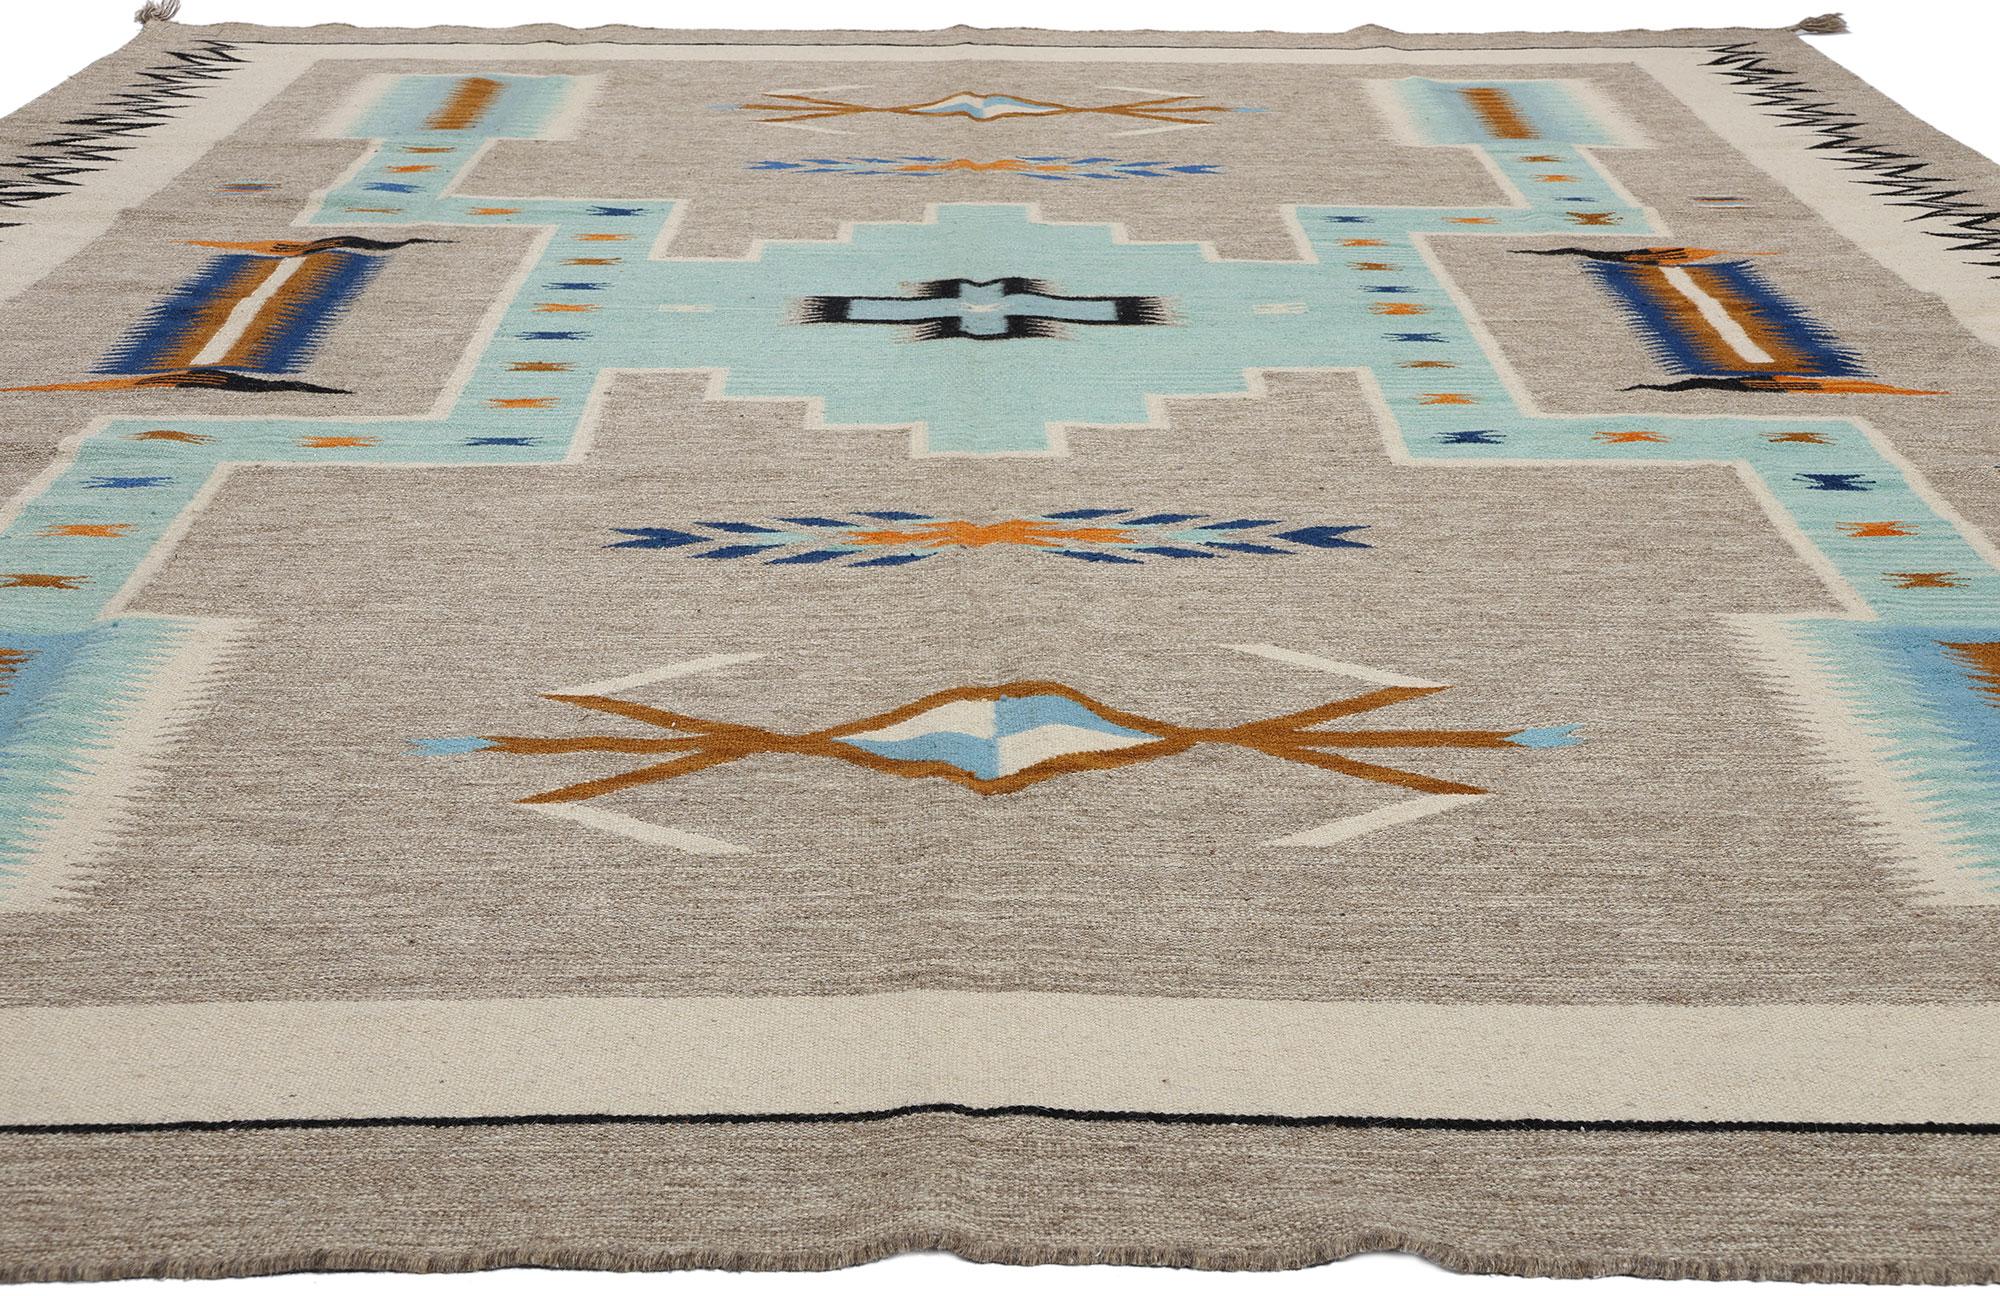 South Asian Southwest Modern Navajo-Style Storm Pattern Rug Contemporary Santa Fe For Sale